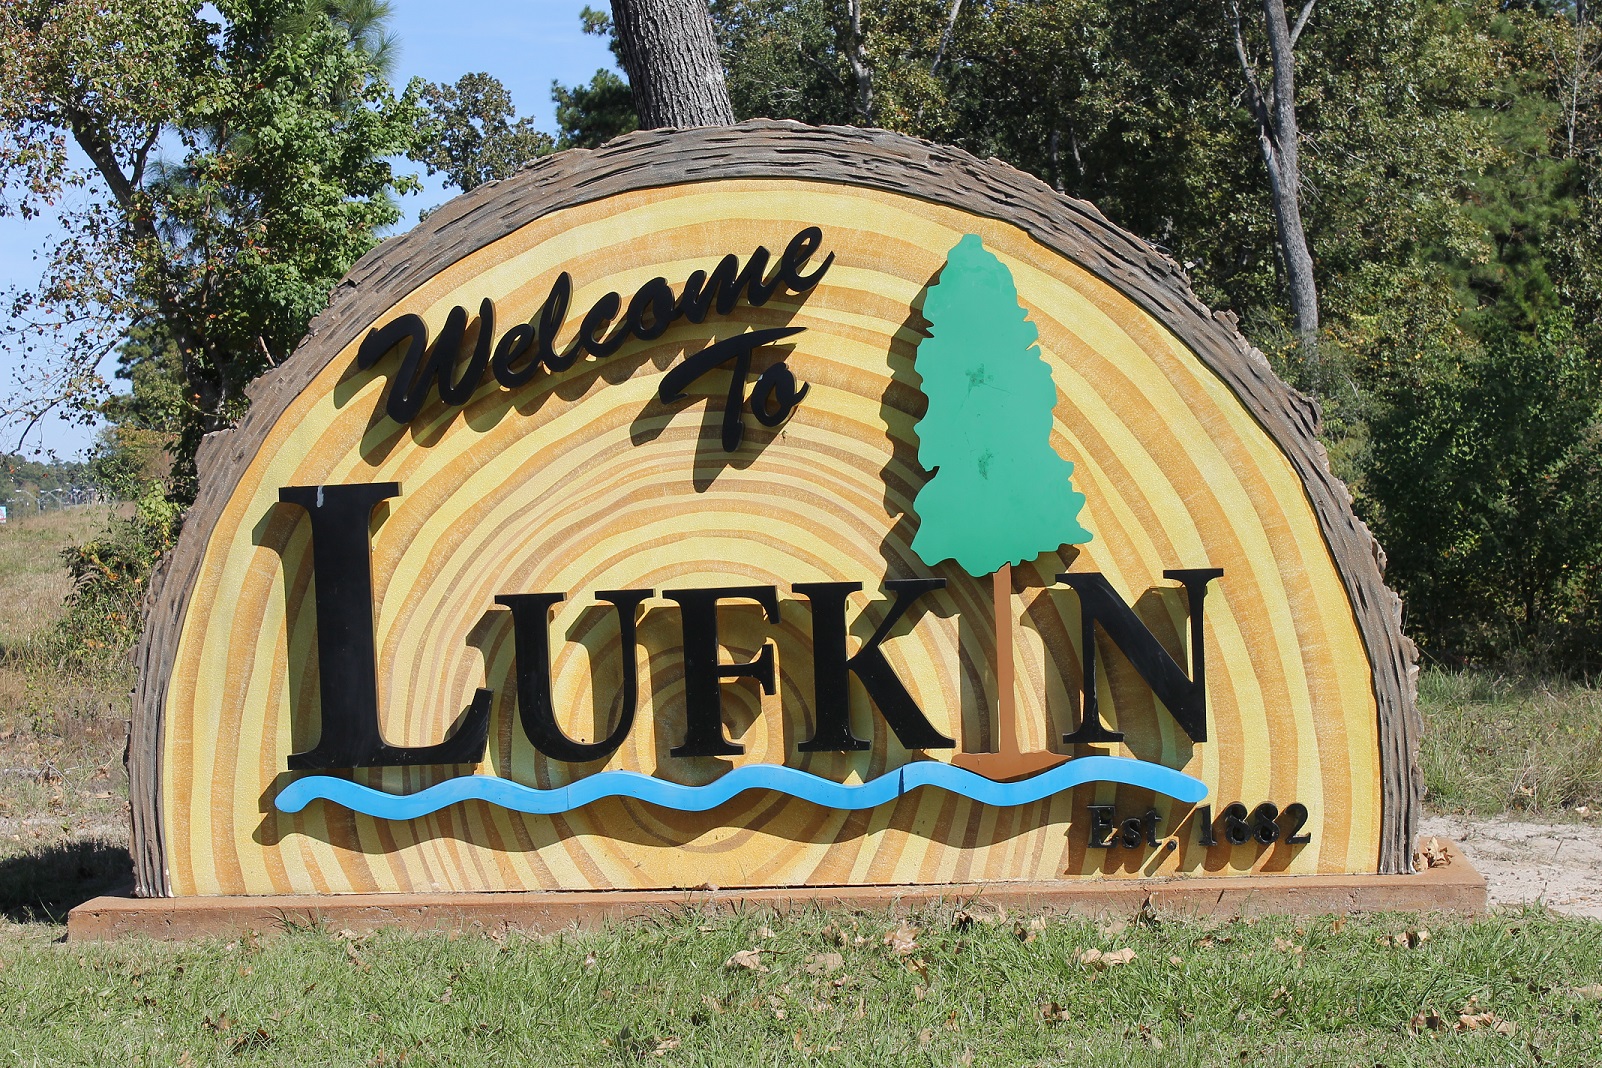 Welcome to Lufkin sign shaped as a log